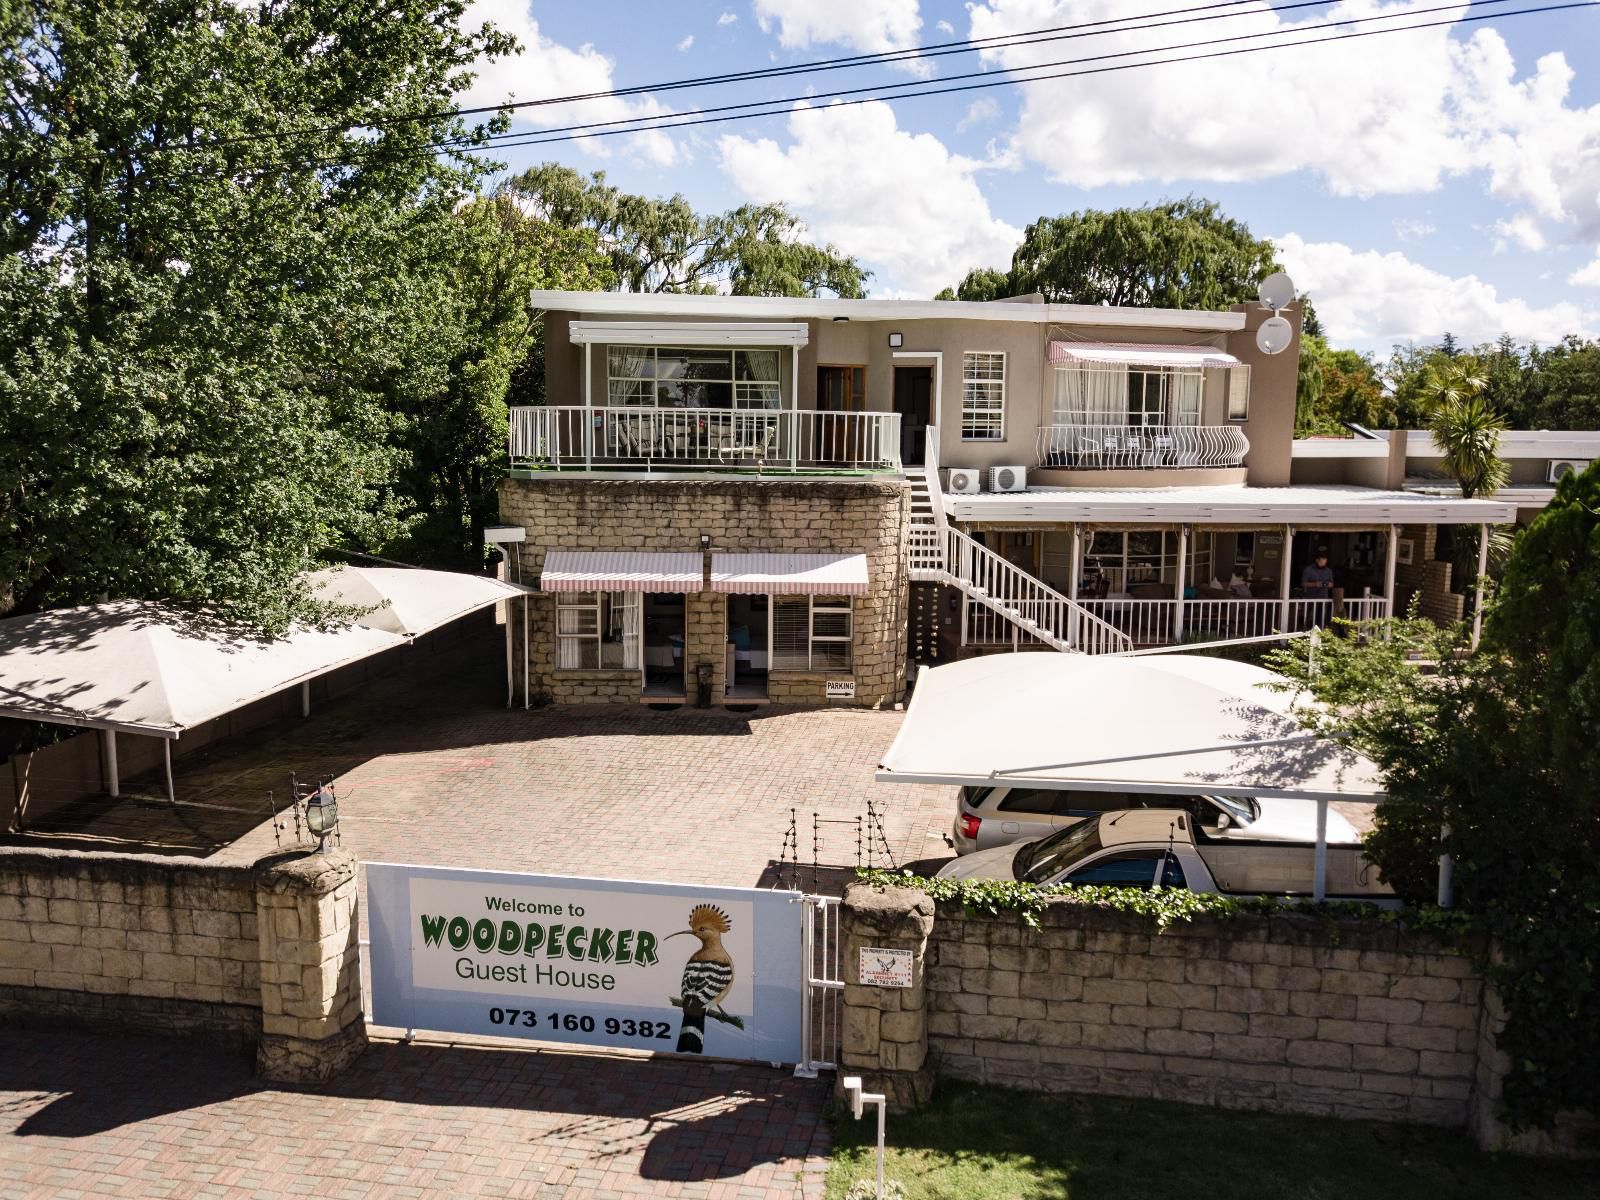 Woodpecker Bed And Breakfast Ficksburg Free State South Africa House, Building, Architecture